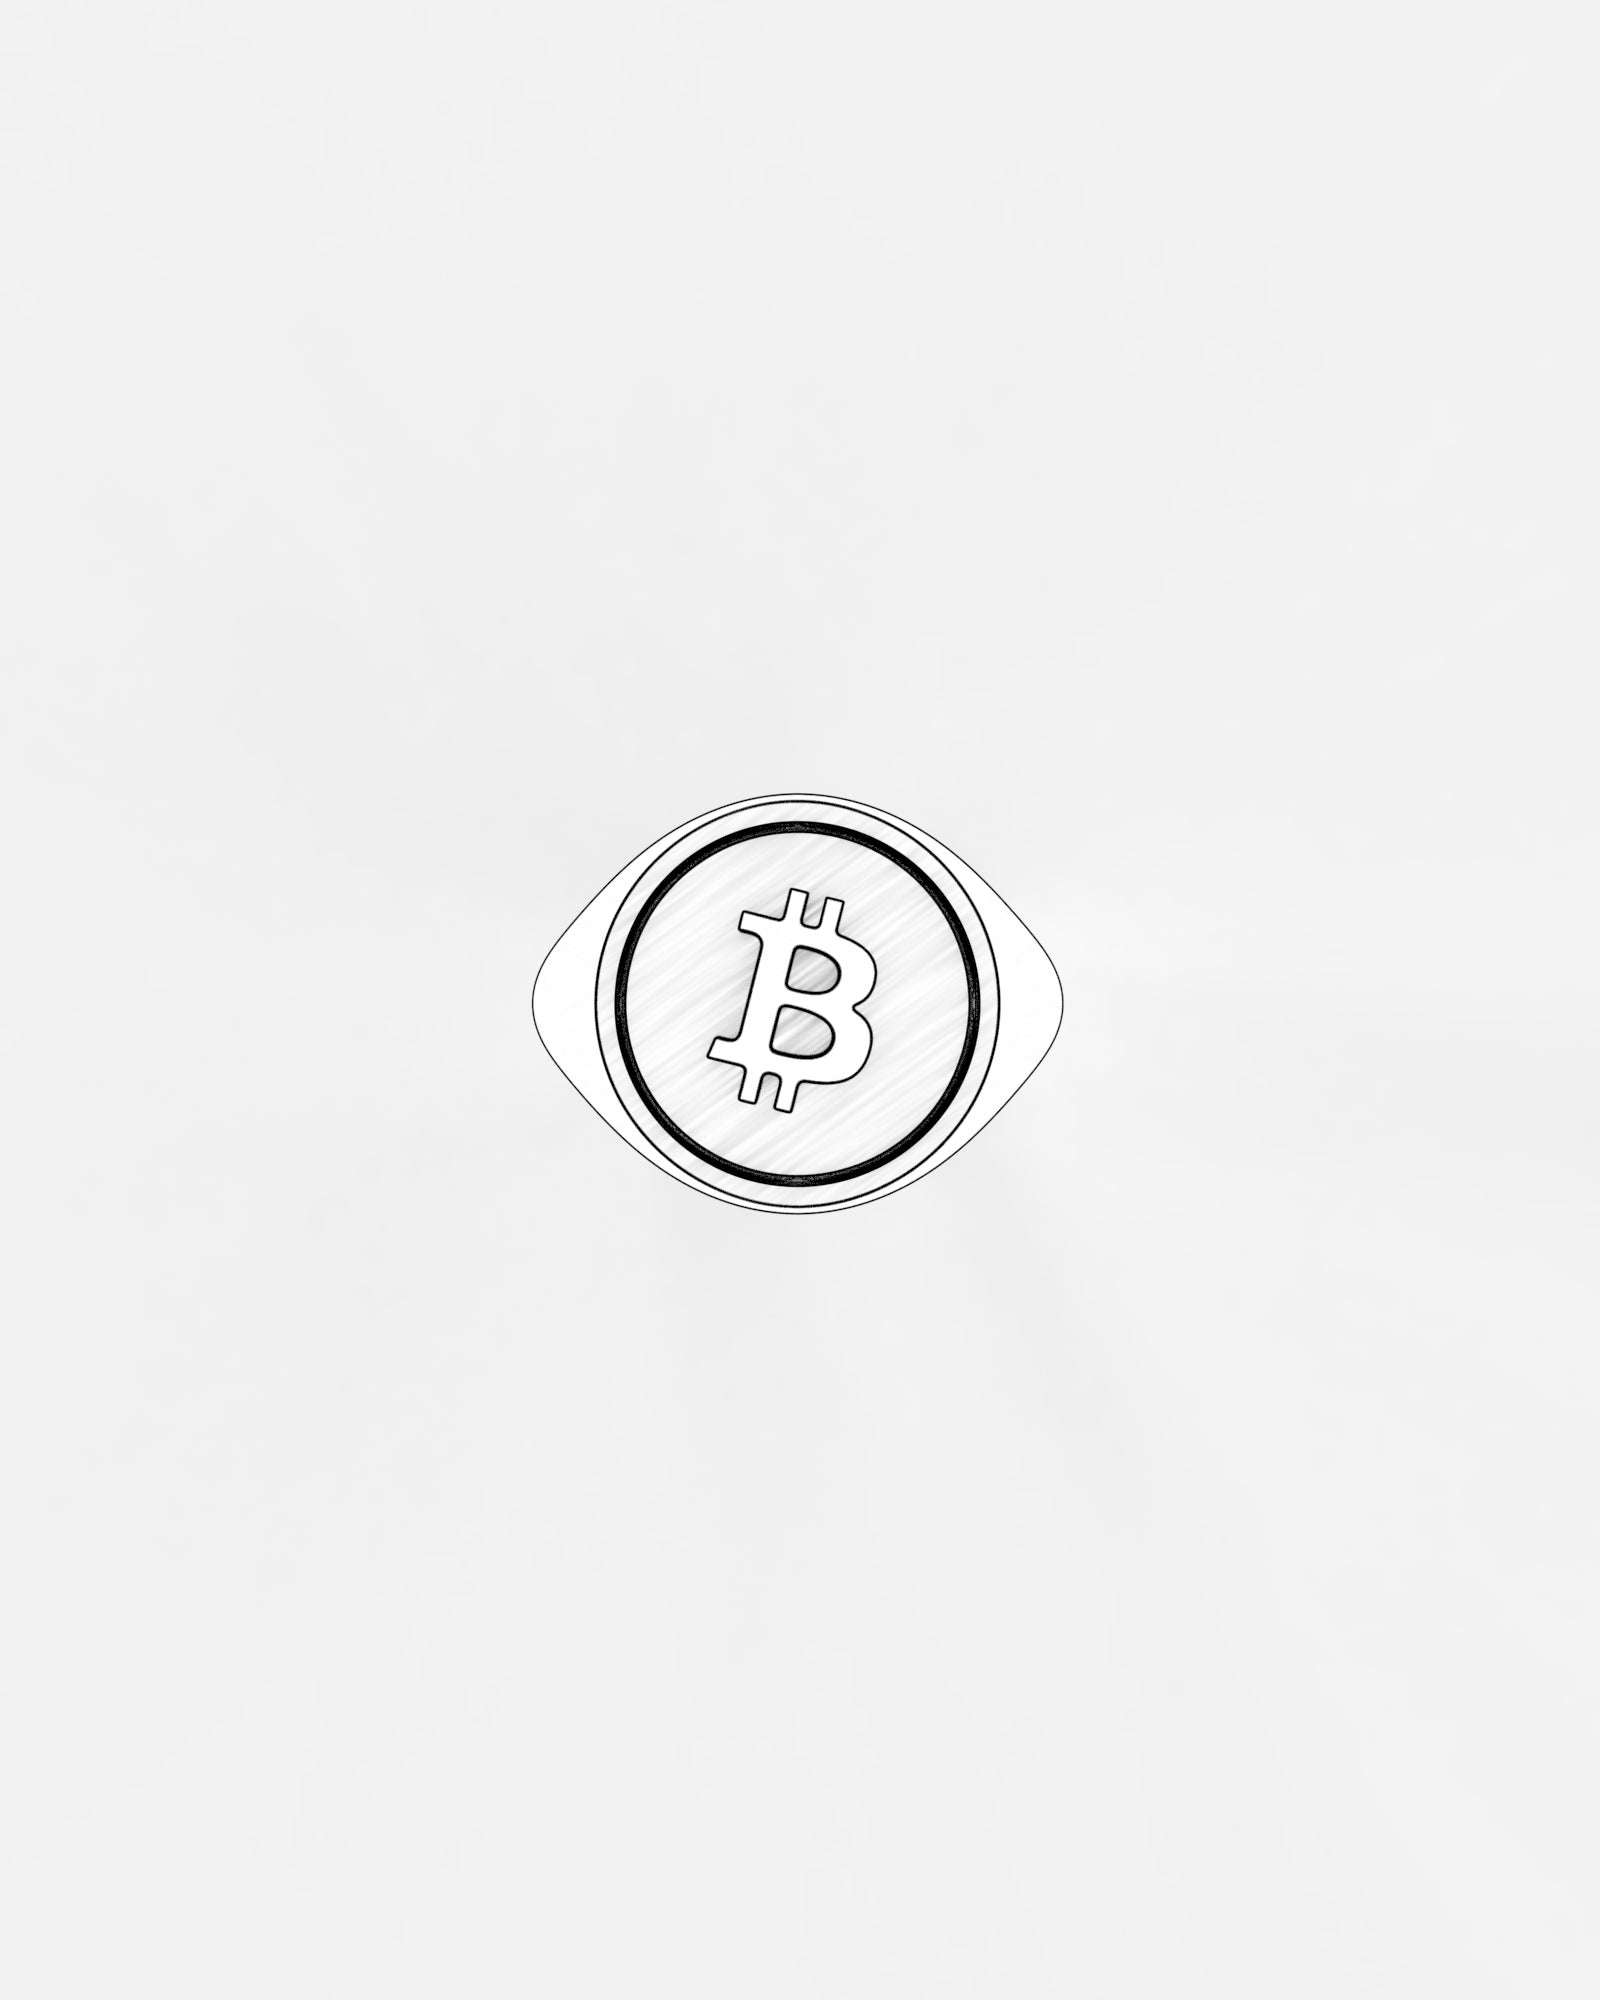 Large Bitcoin Crypto Ring in Sterling Silver / 9k Rose Gold by Wilson Grant